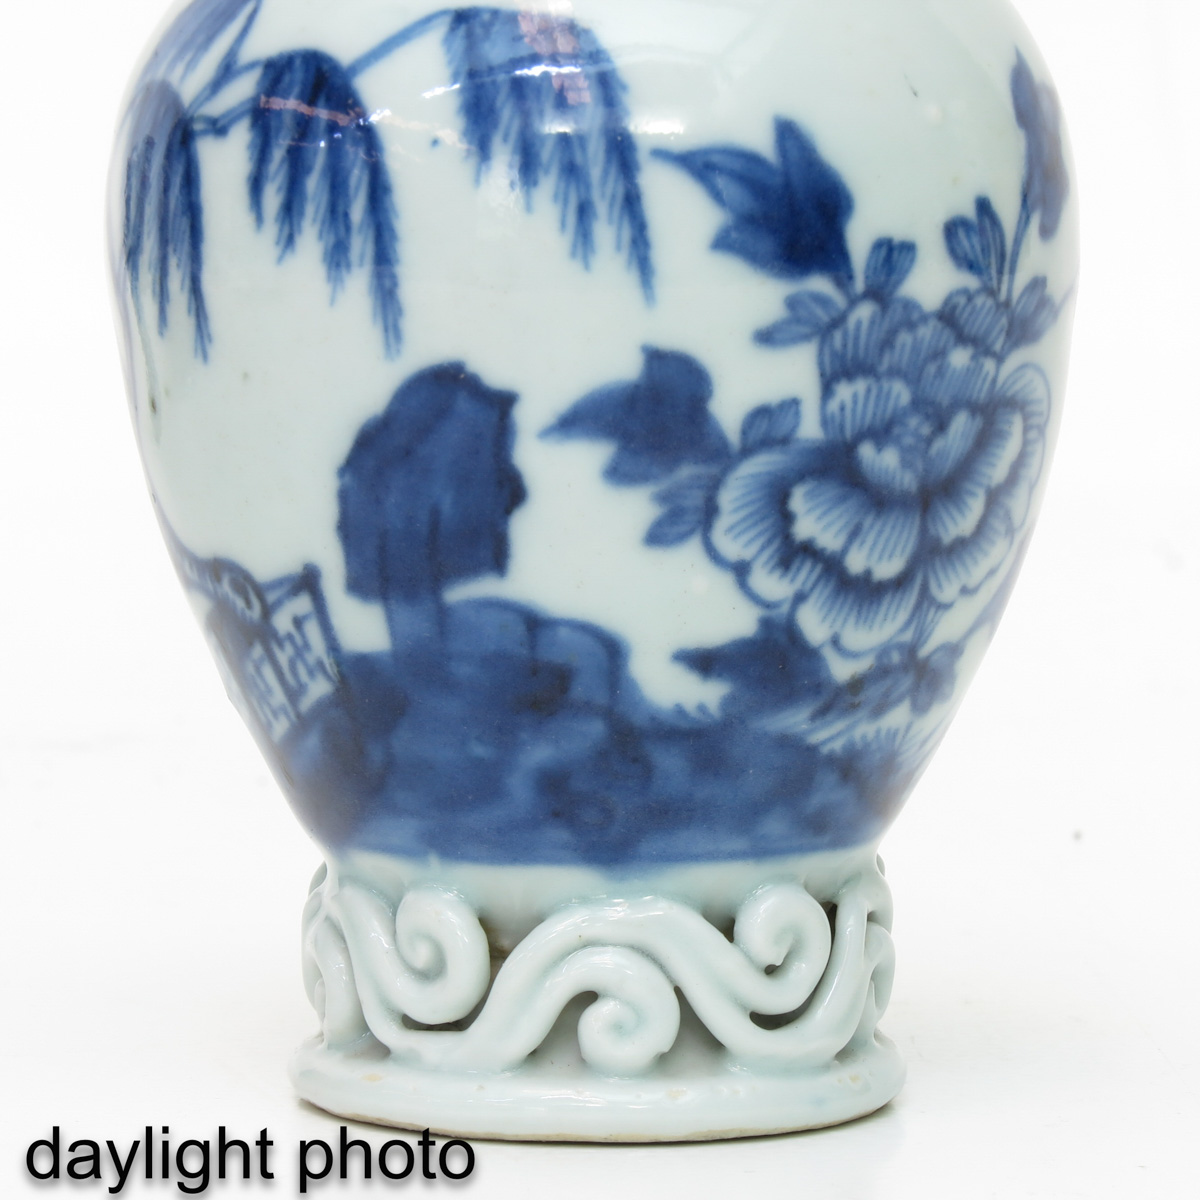 A Diverse Collection of Porcelain - Image 10 of 10